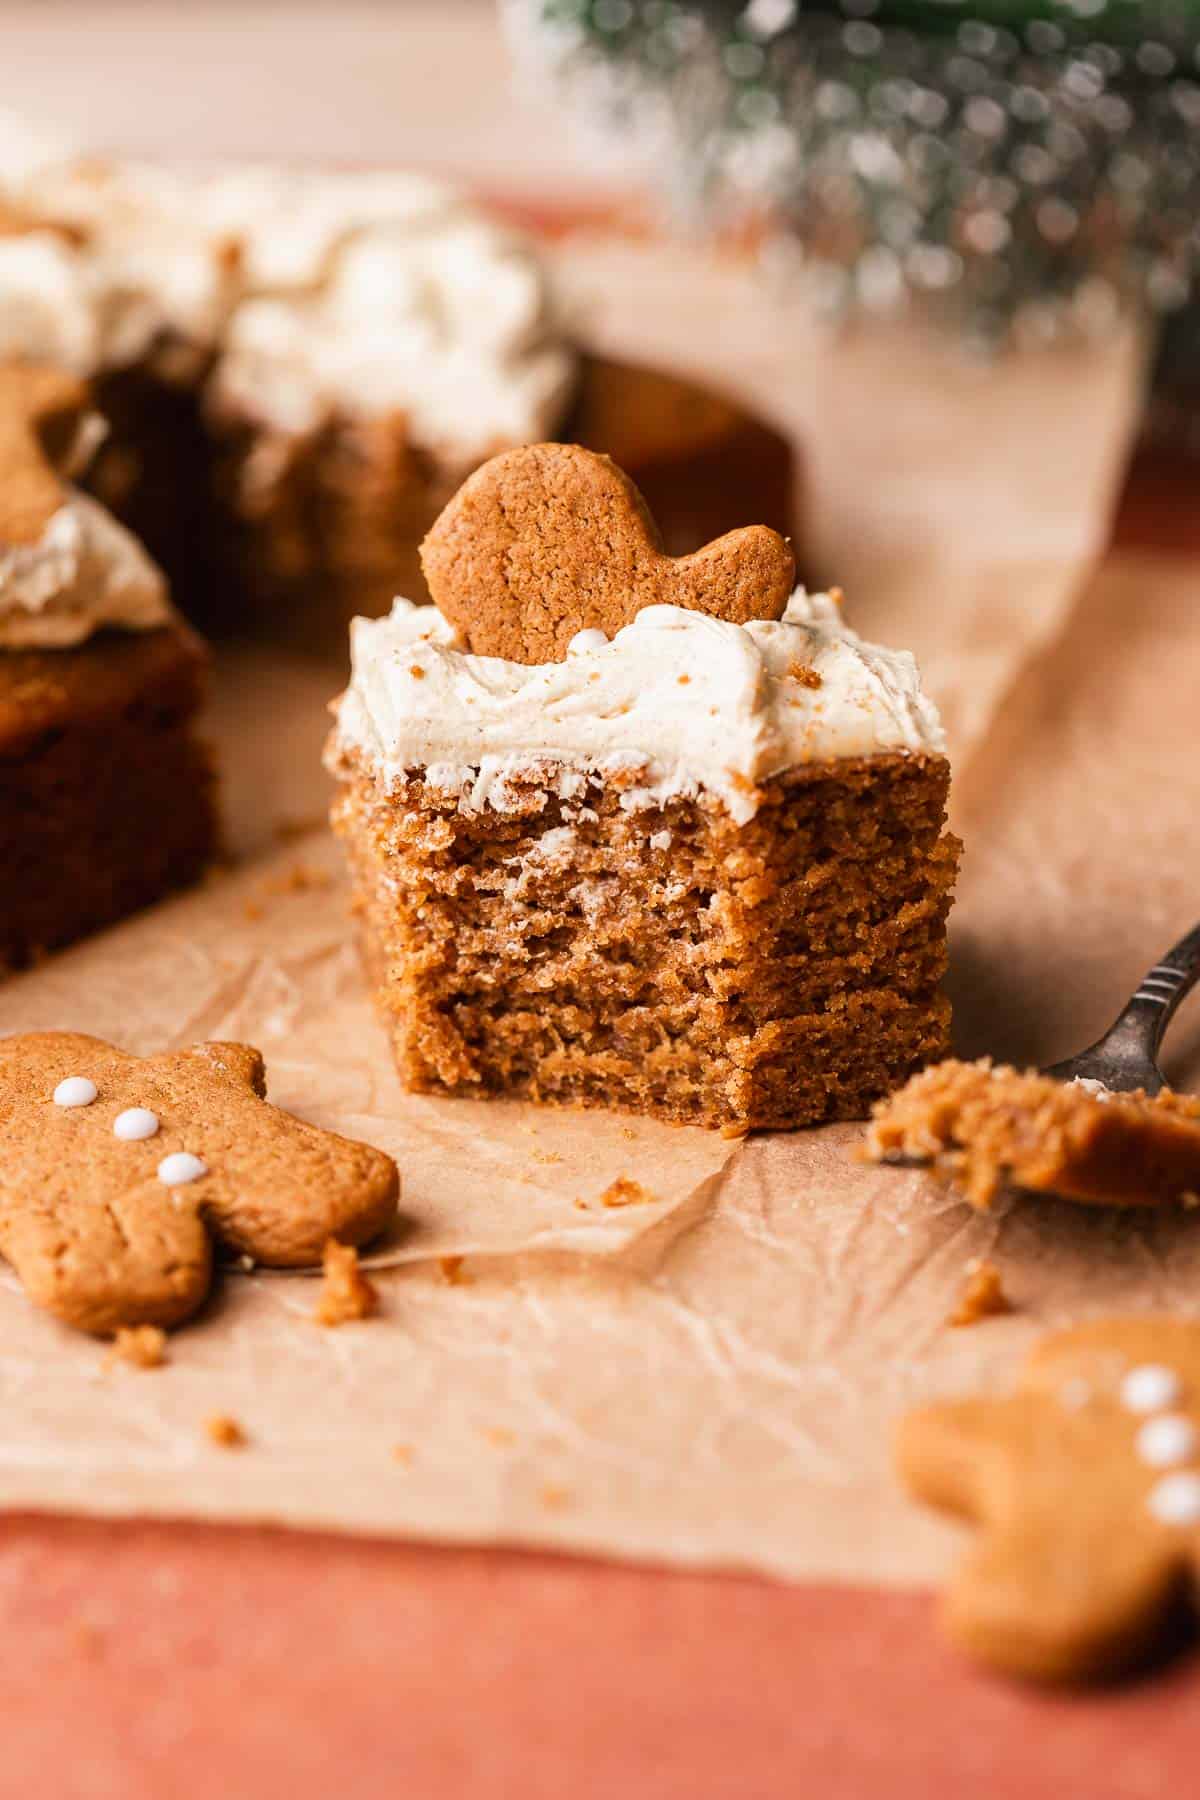 A slice of gingerbread cake with a bite taken out of it on brown parchment paper.